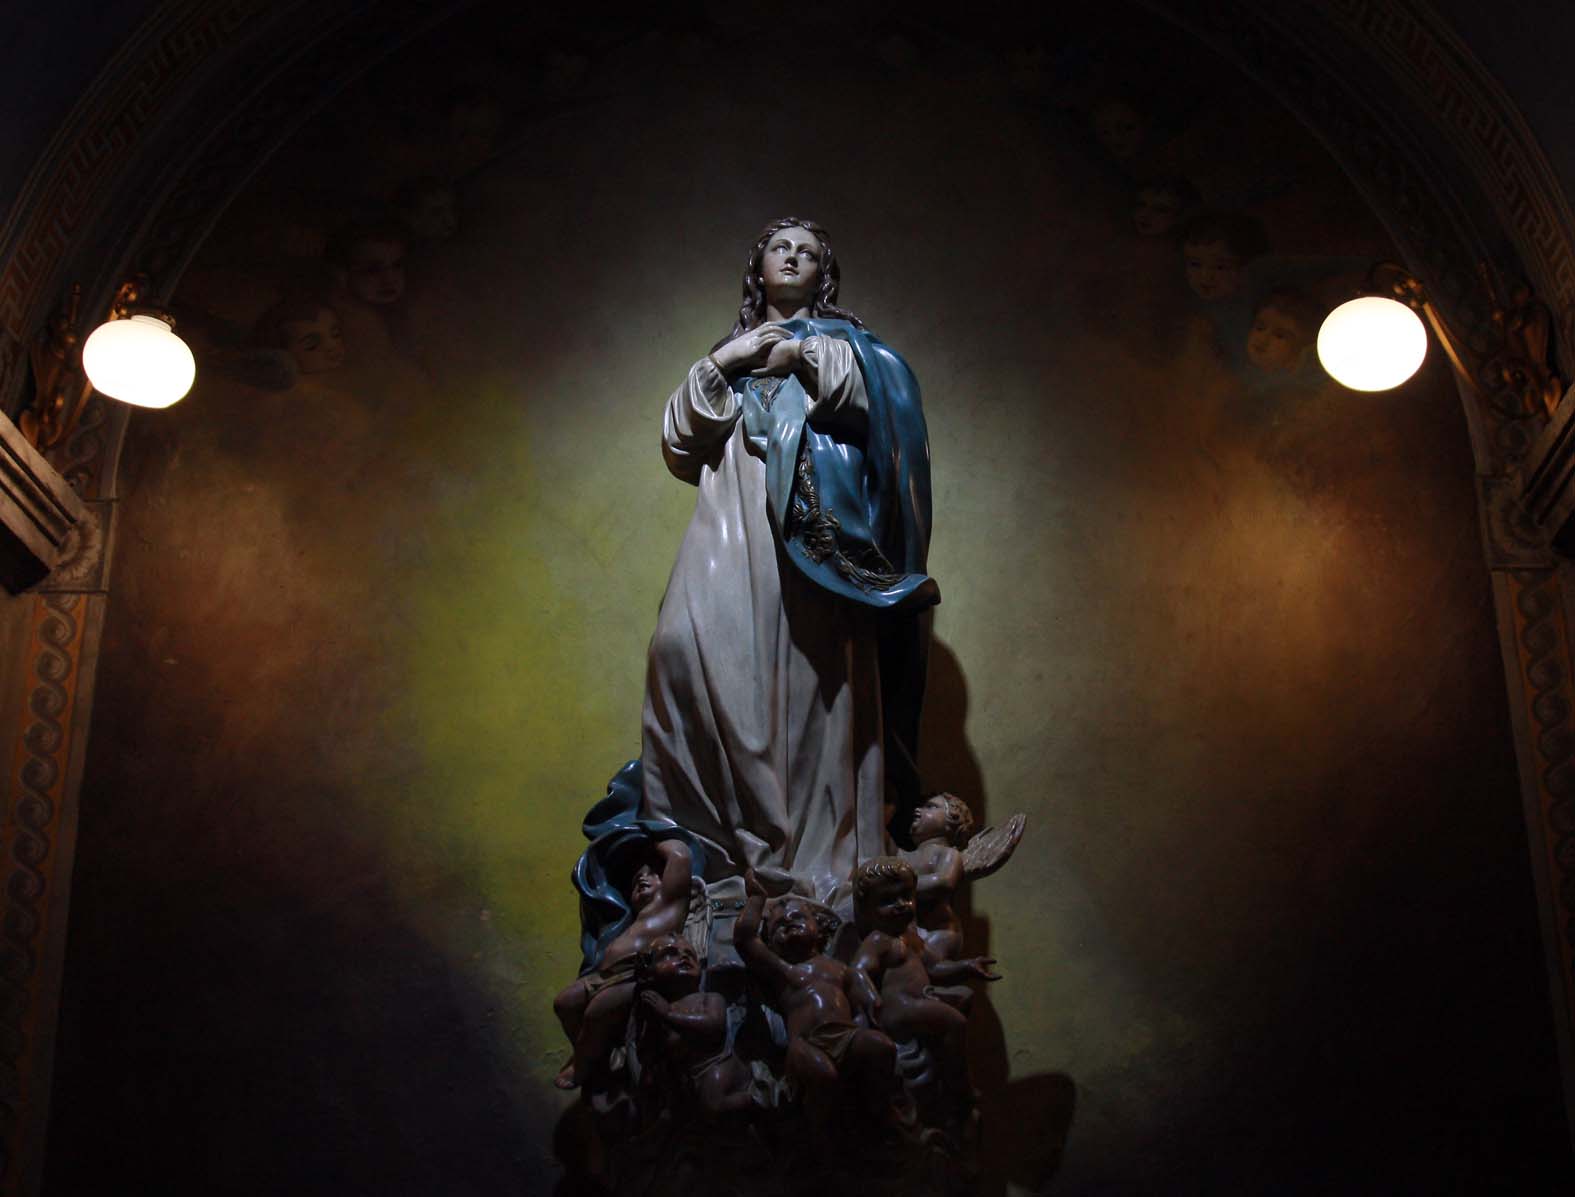 the statue of mary is shown in front of two lights